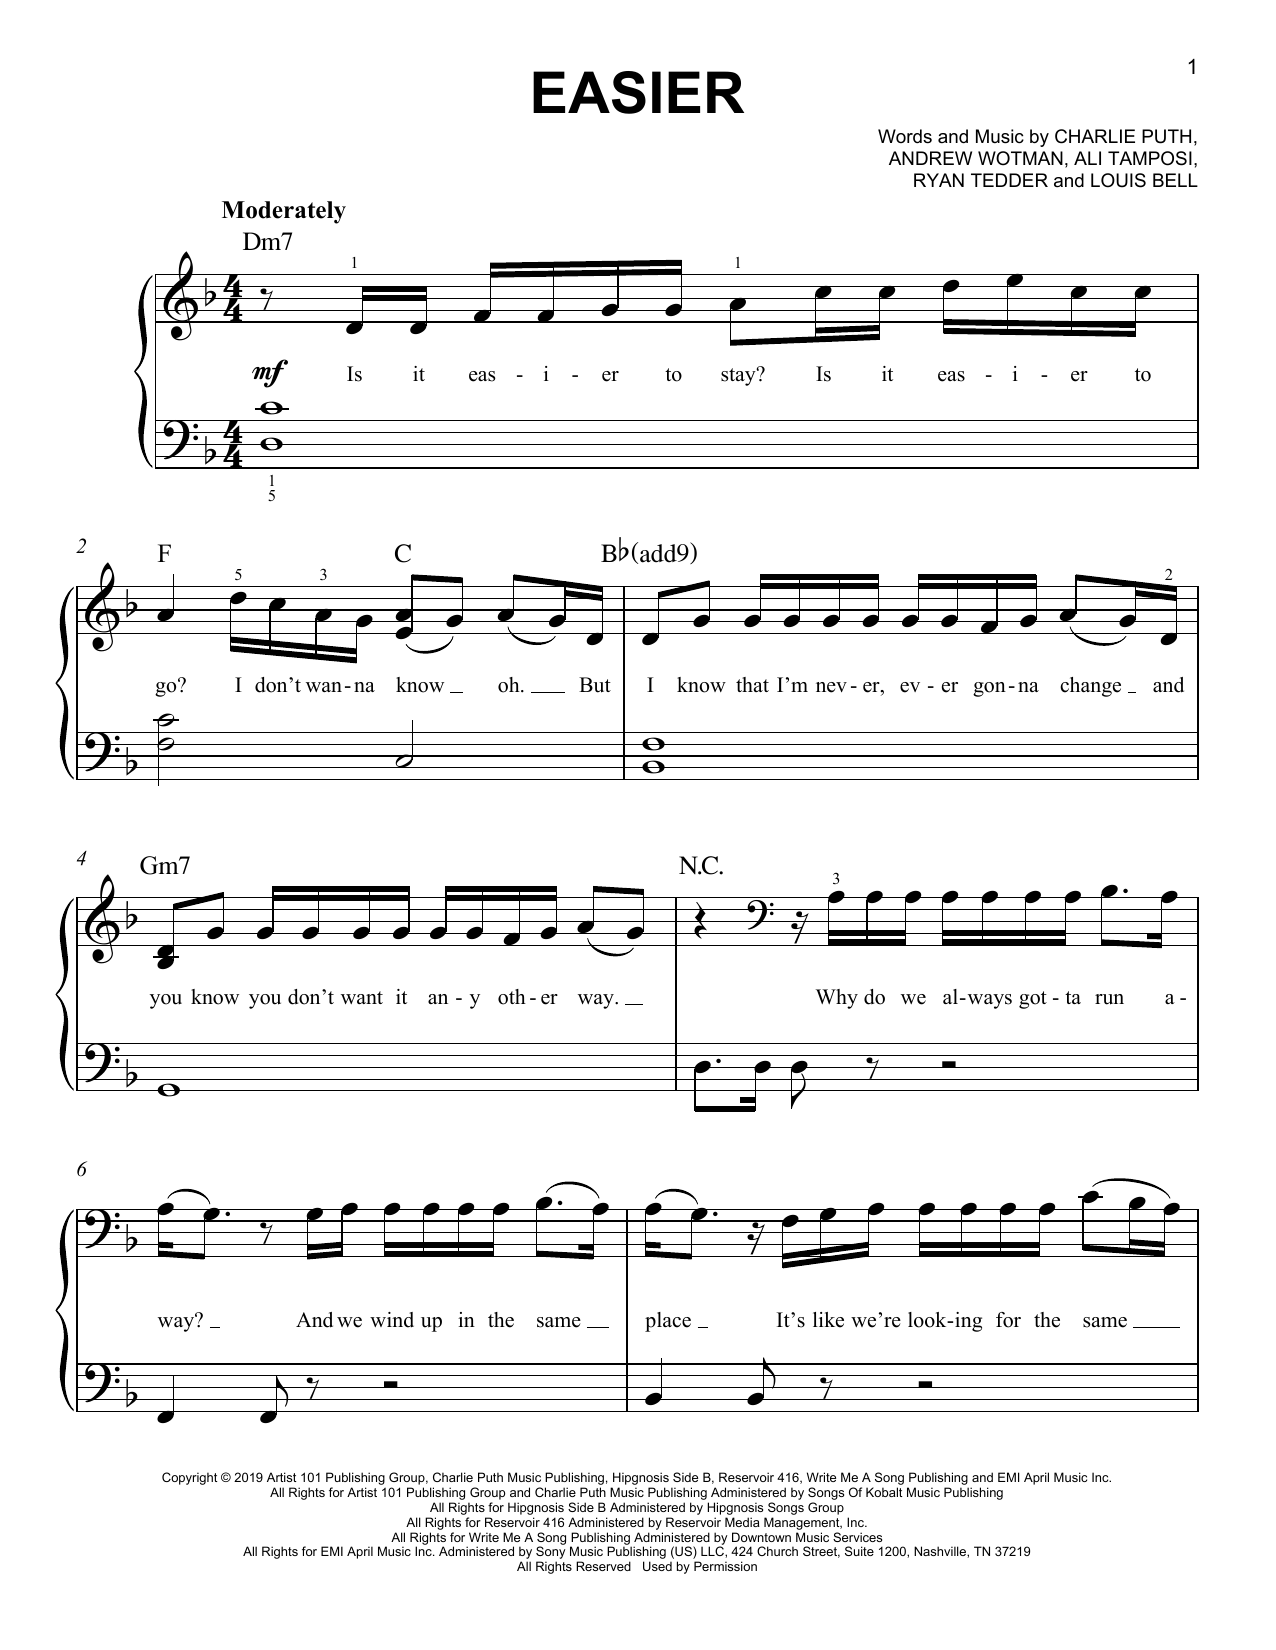 5 Seconds of Summer Easier sheet music notes printable PDF score